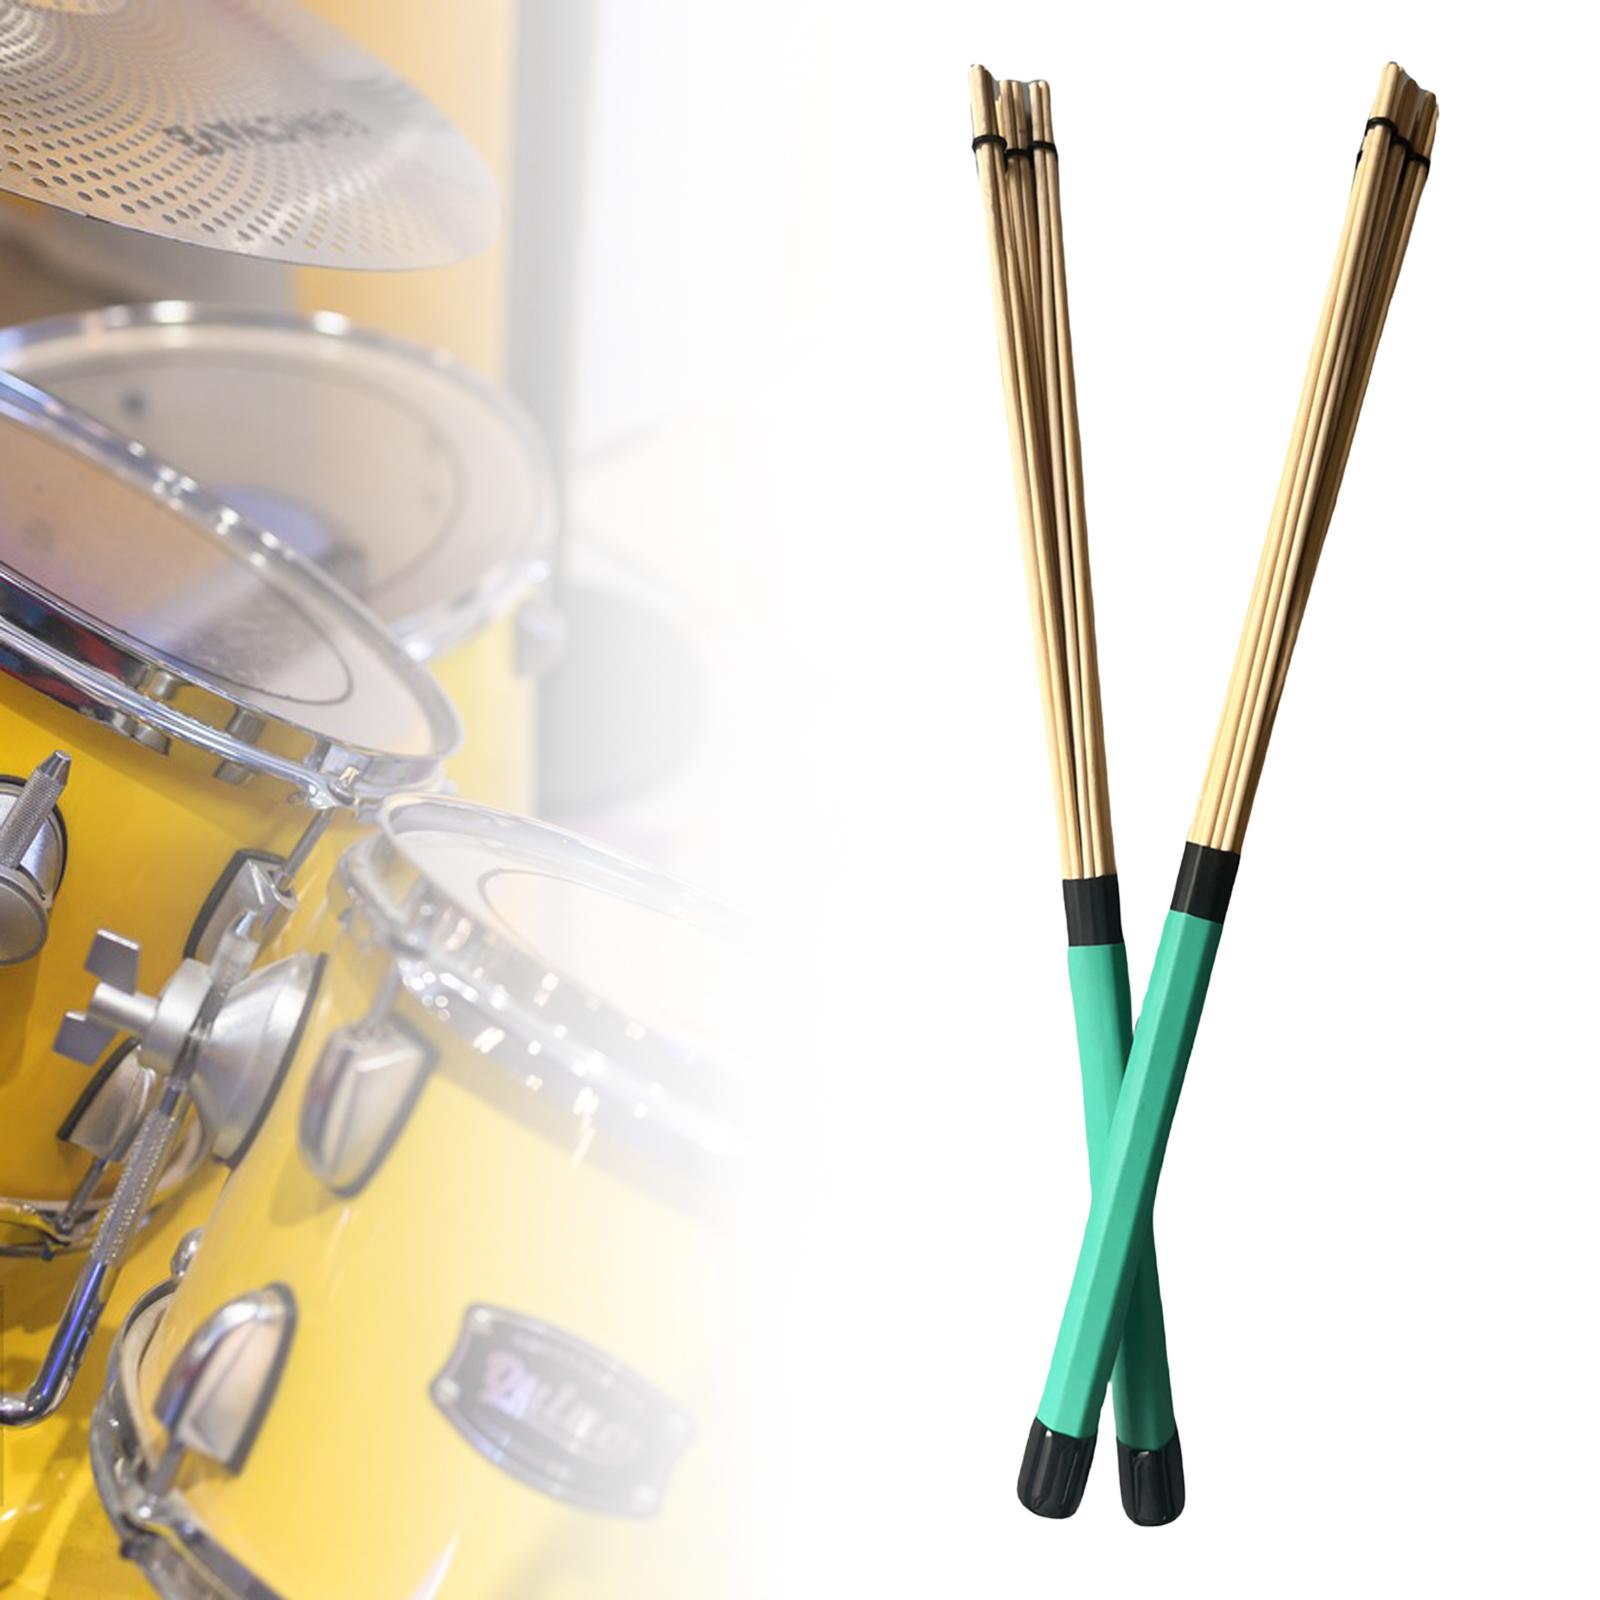 2 Pieces Bamboo Drum Stick Rods Brushes for Acoustic Performance Small Venue Green